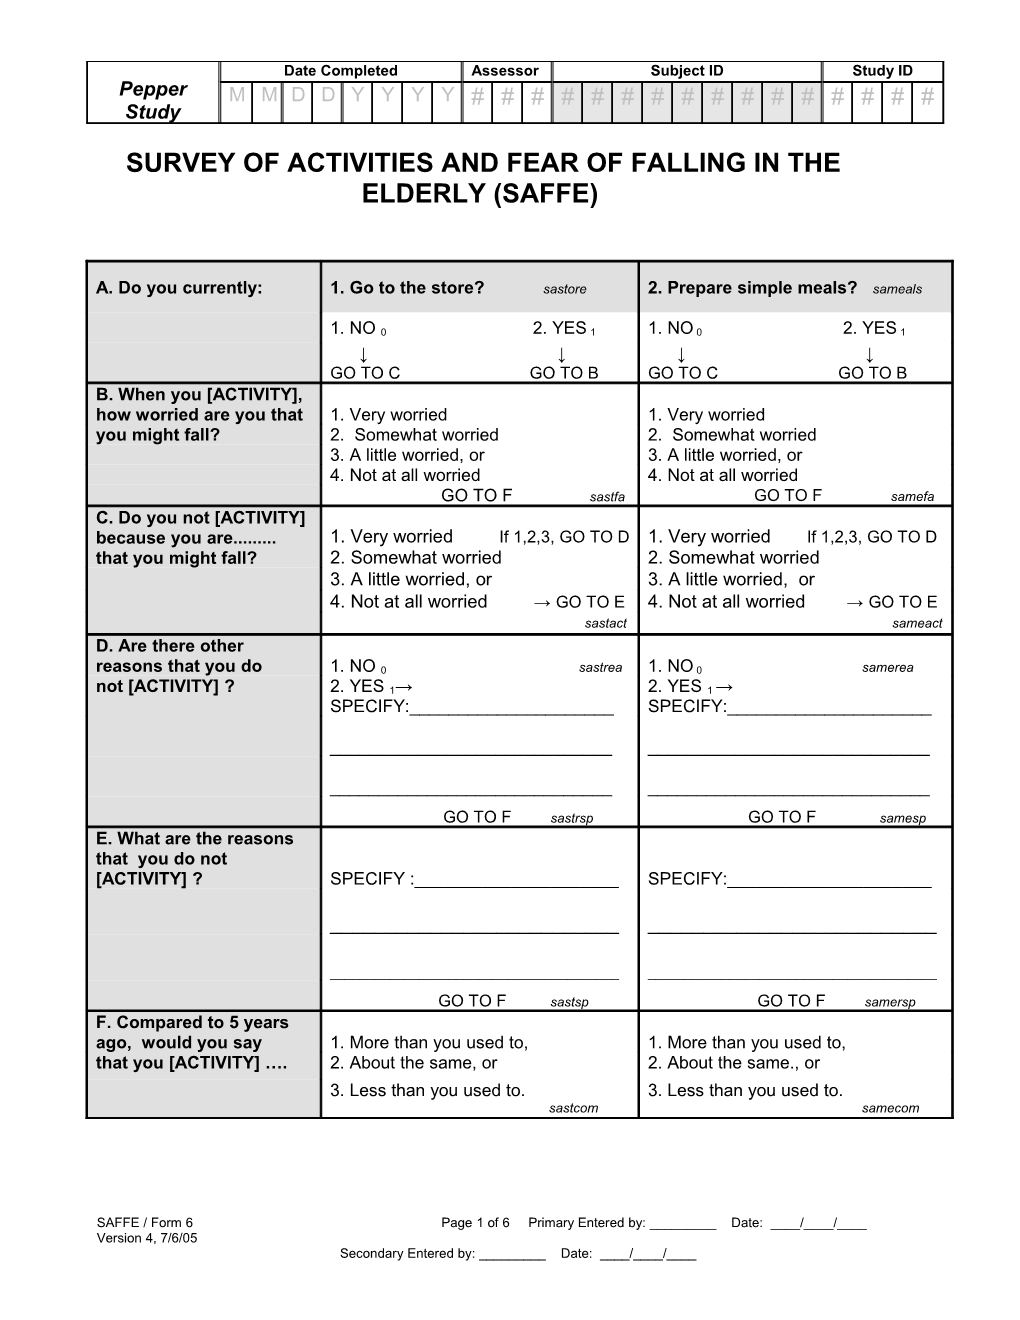 Survey of Activities and Fear of Falling in the Elderly (Saffe)